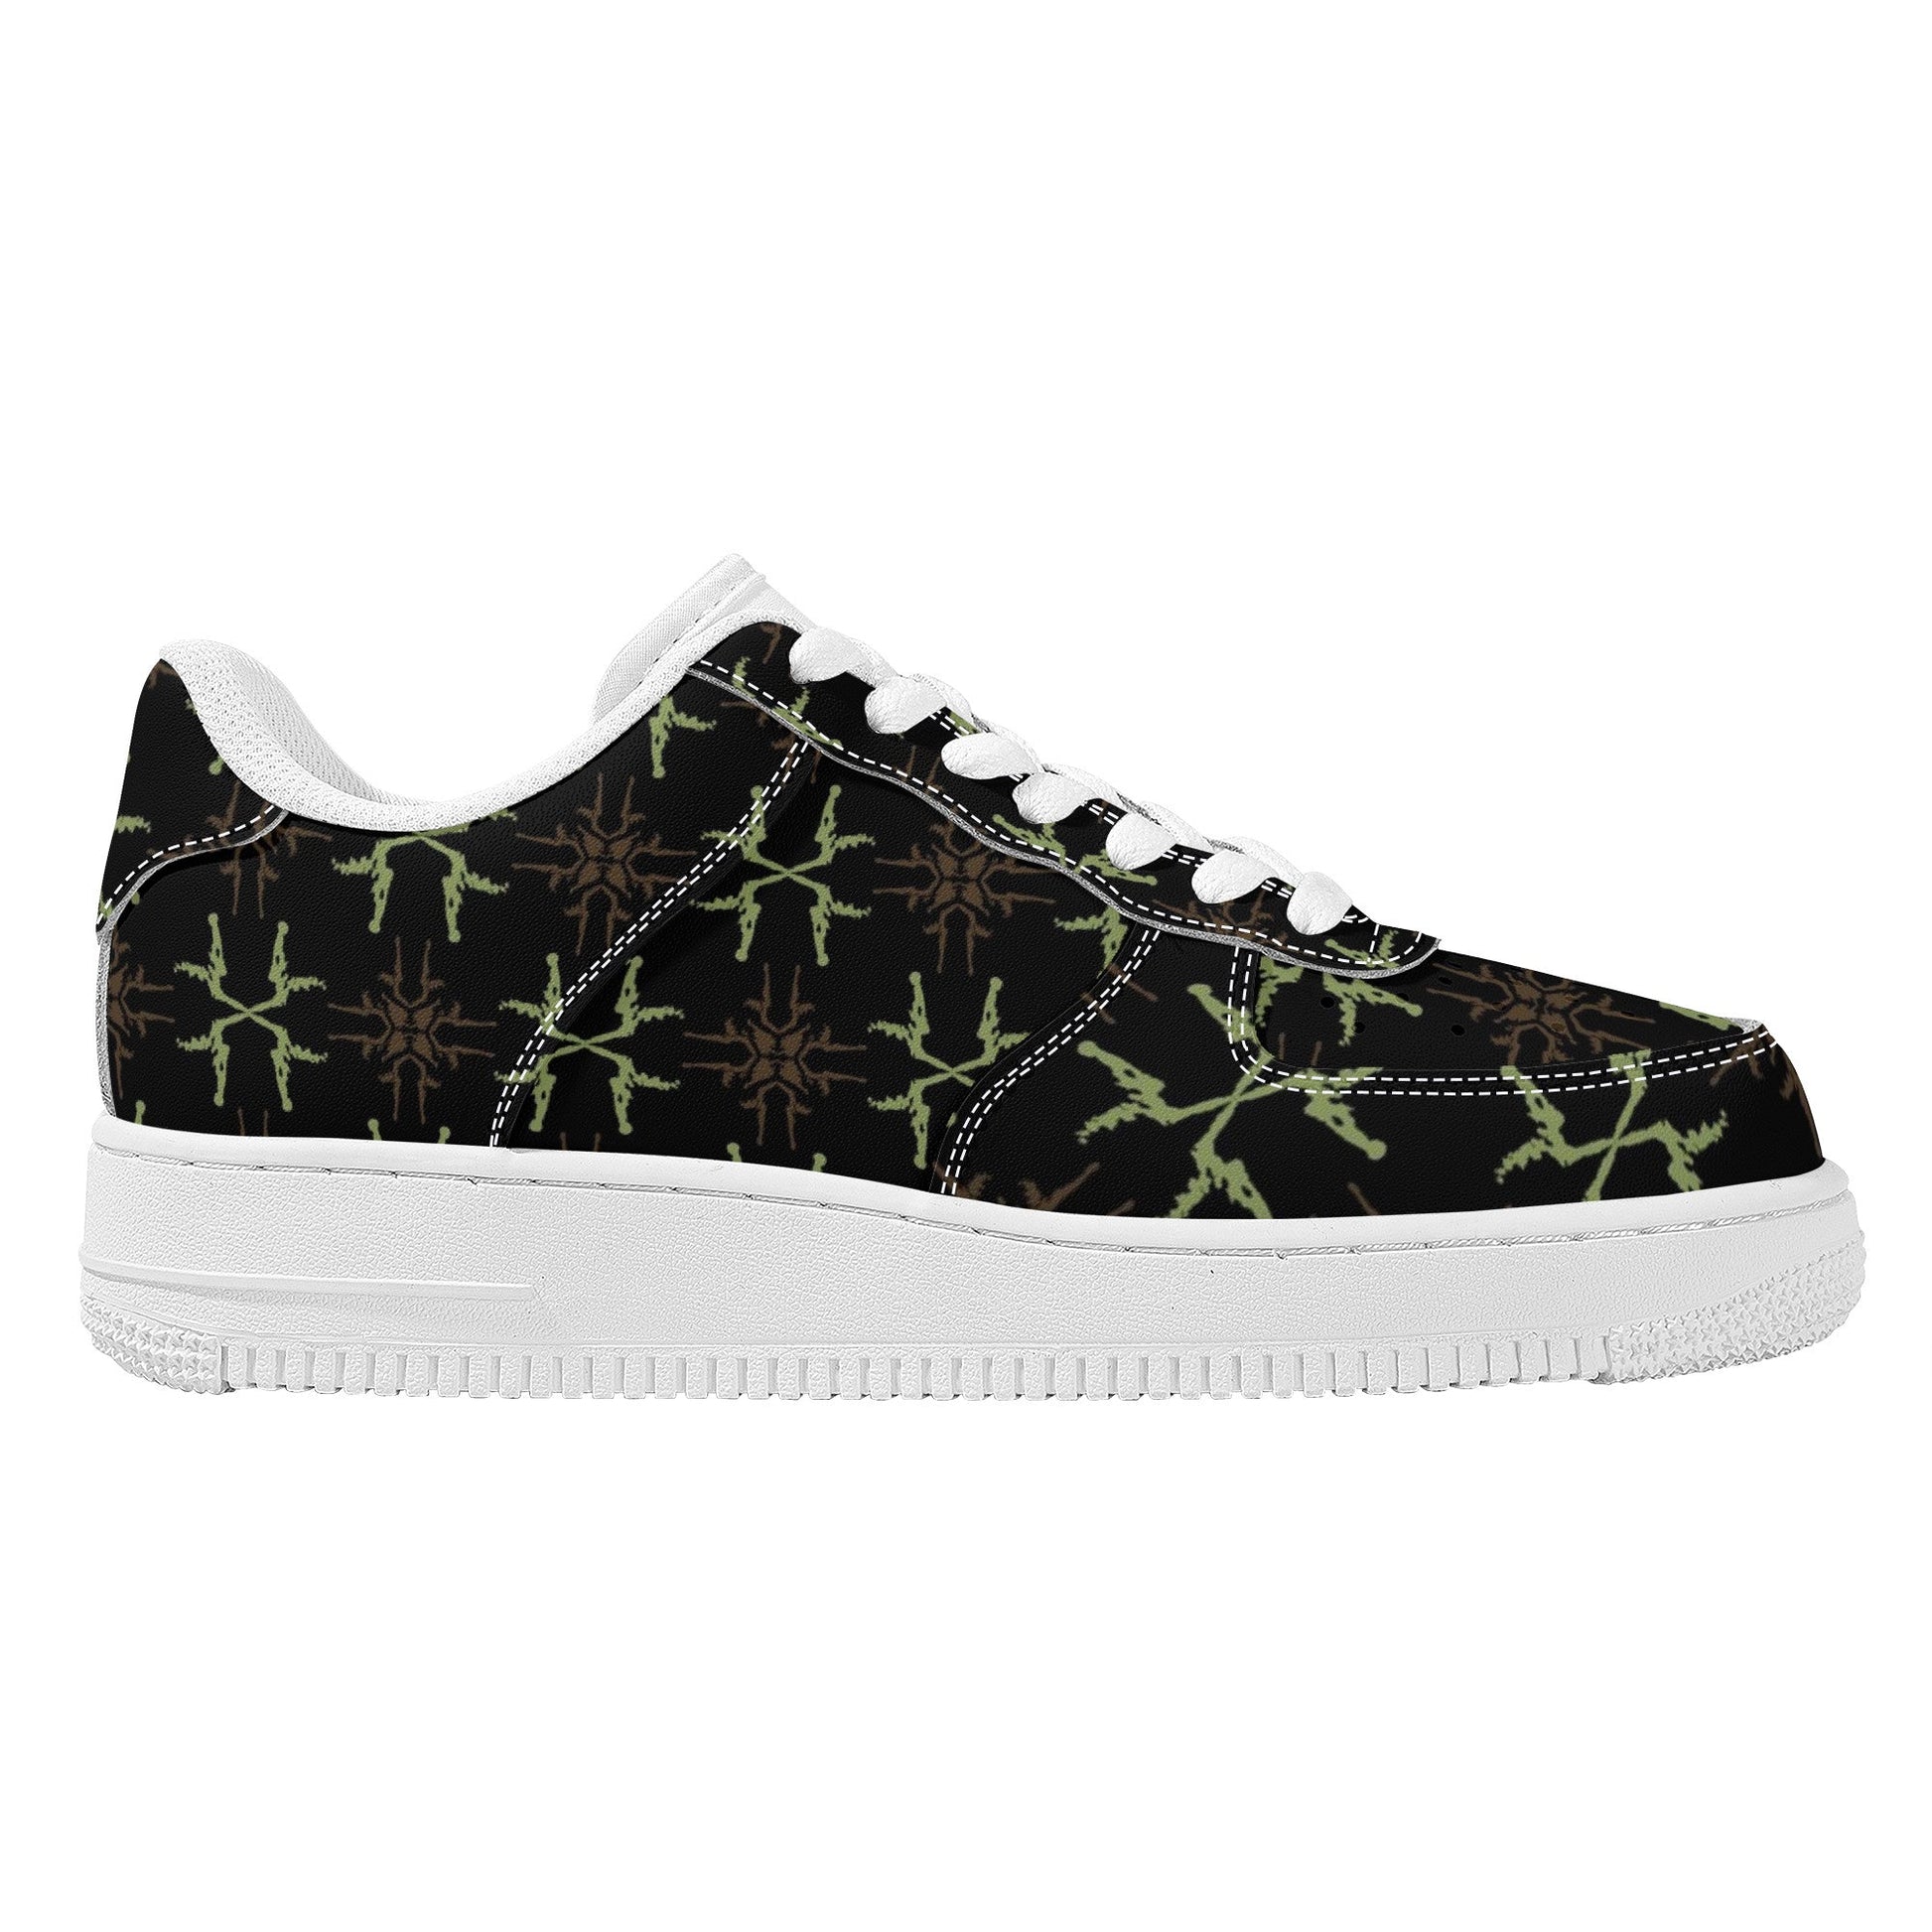 Designer Low Top Sneakers AirZ -X2 Colloid Colors 